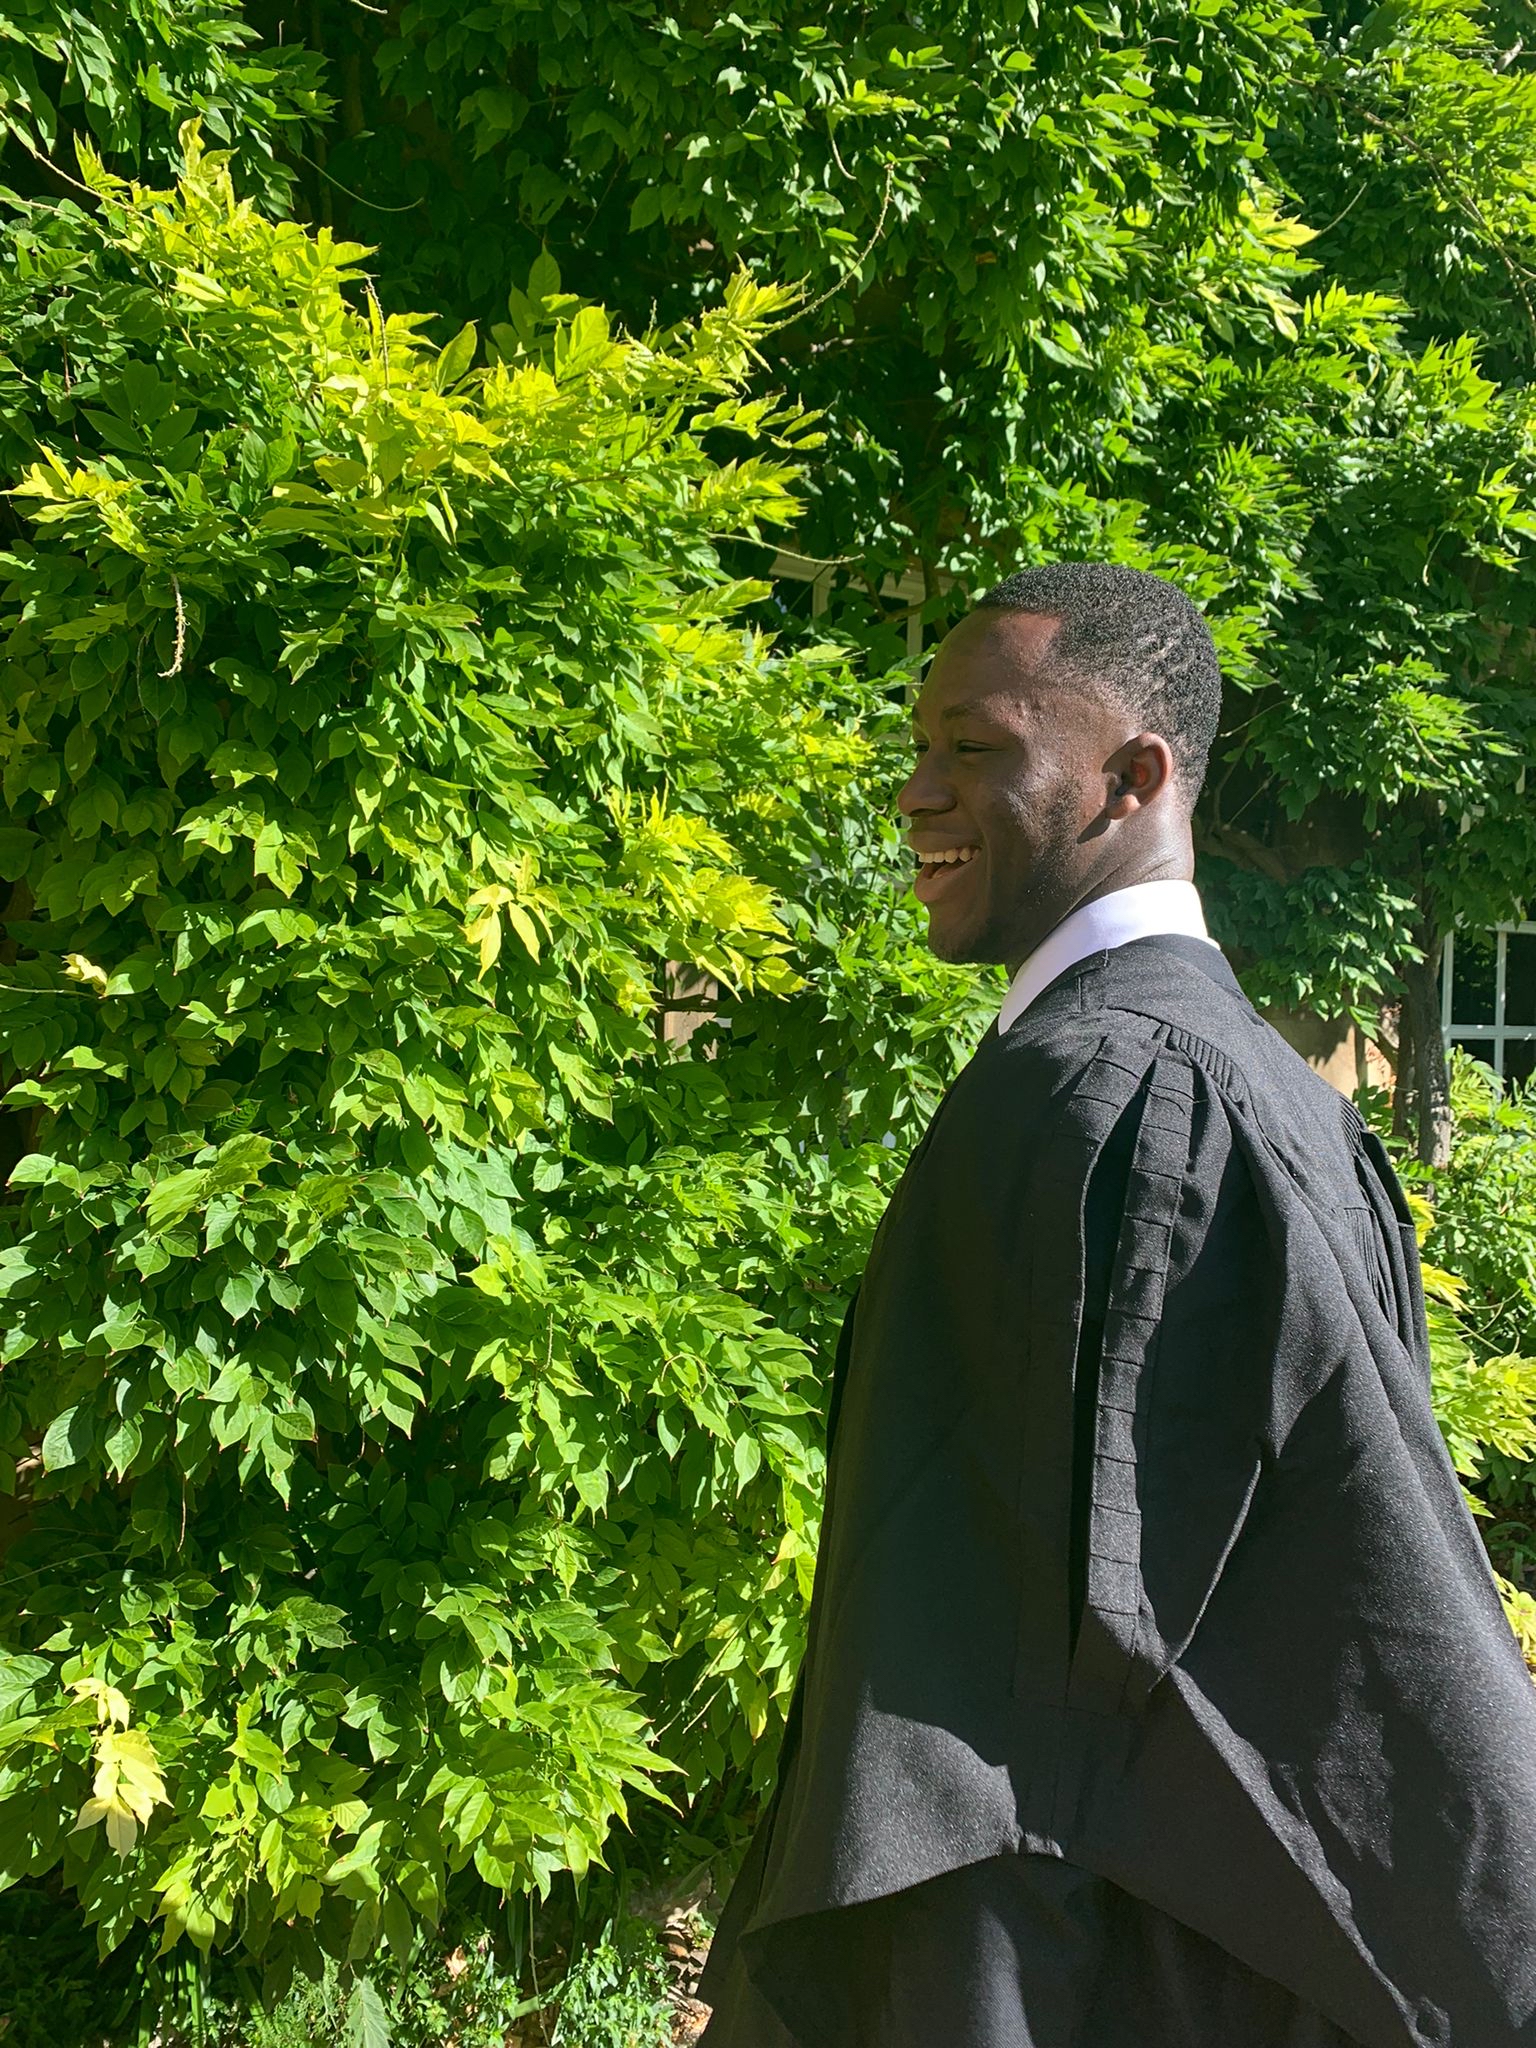 Ayomide in his matriculation gown, in front of greenery